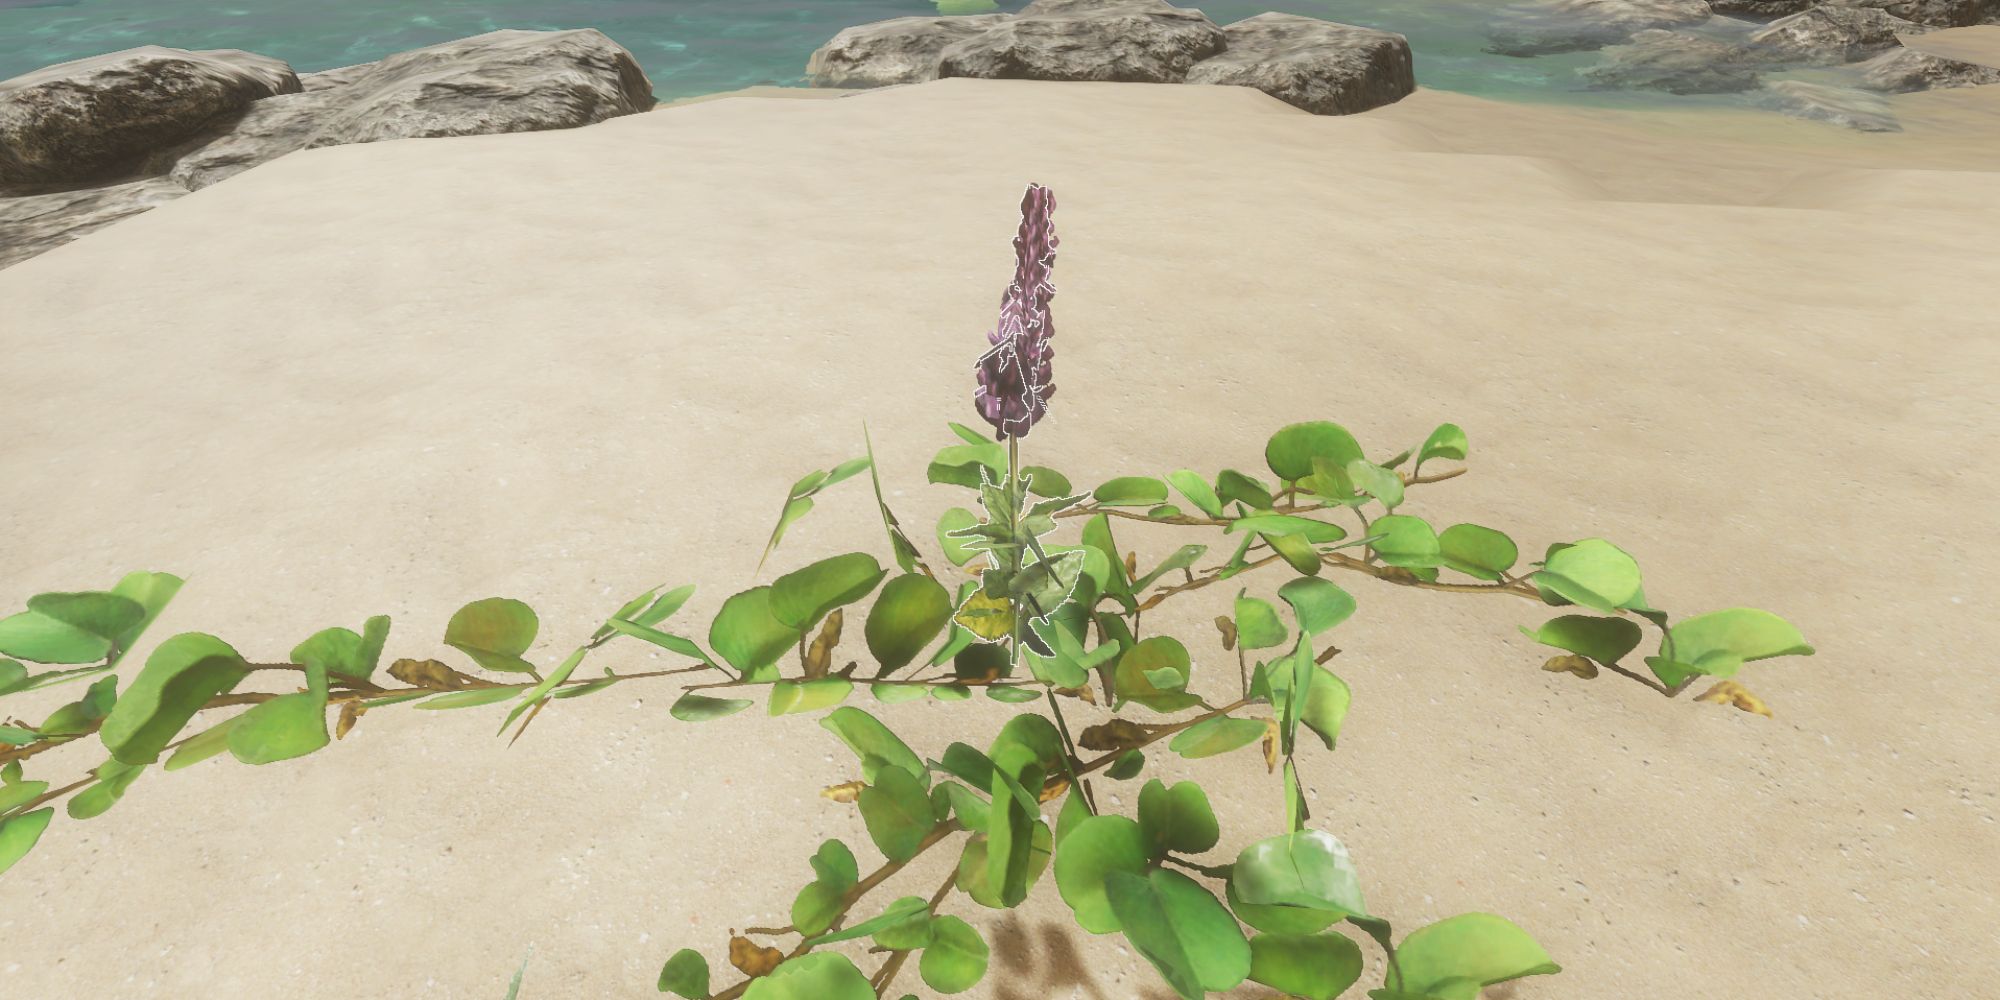 Stranded Deep: How To Use The Tanning Rack